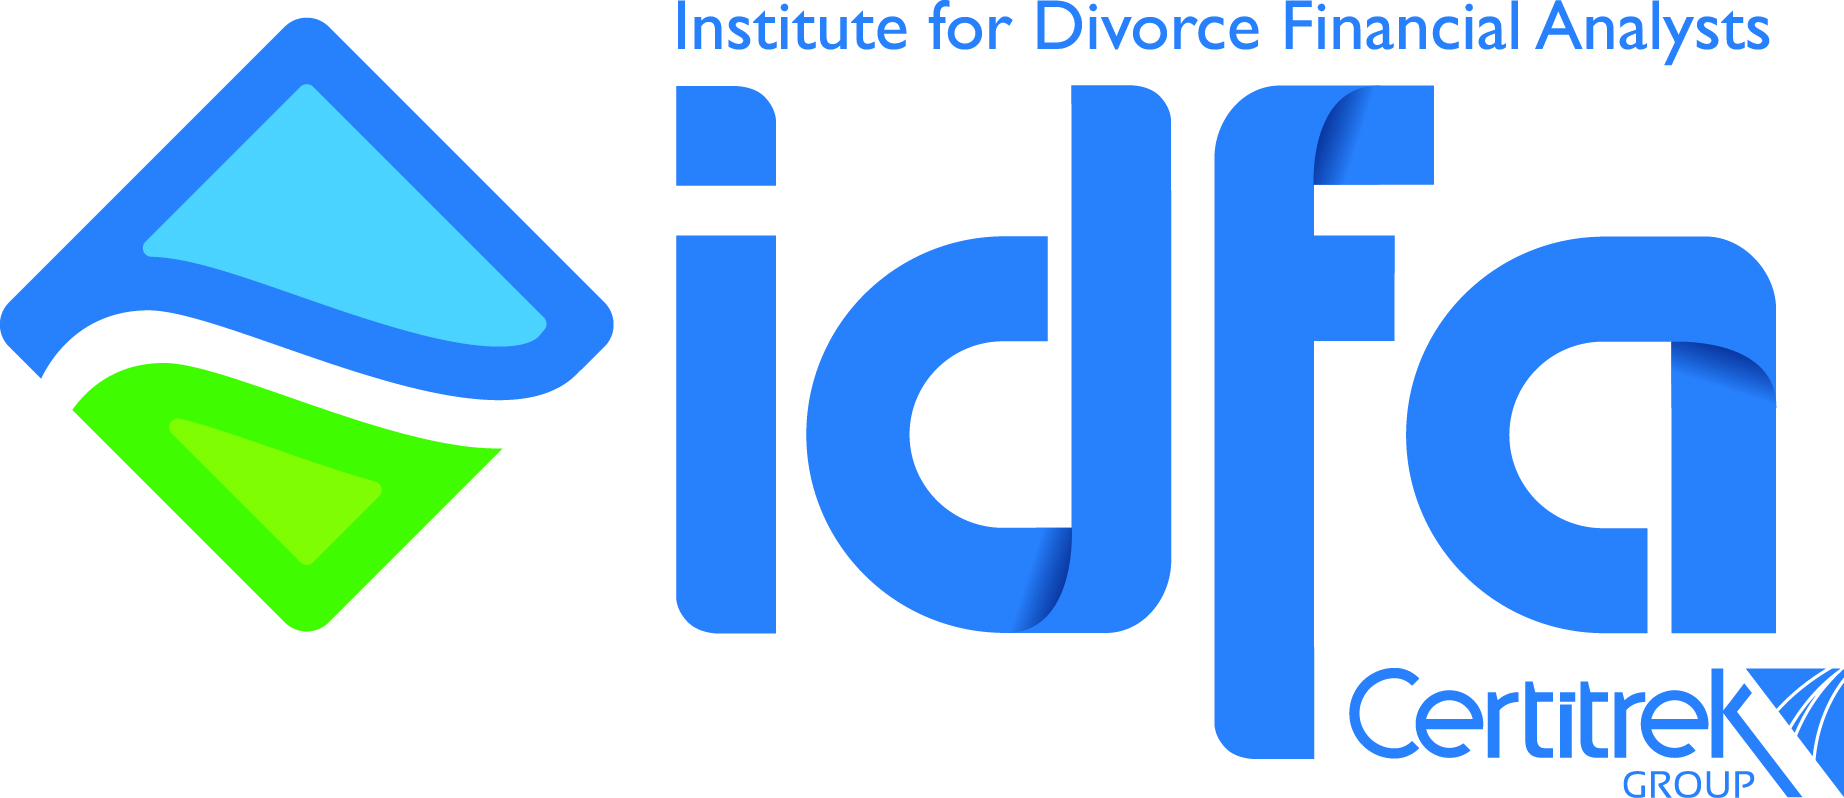 Institute for Divorce Financial Analysts 